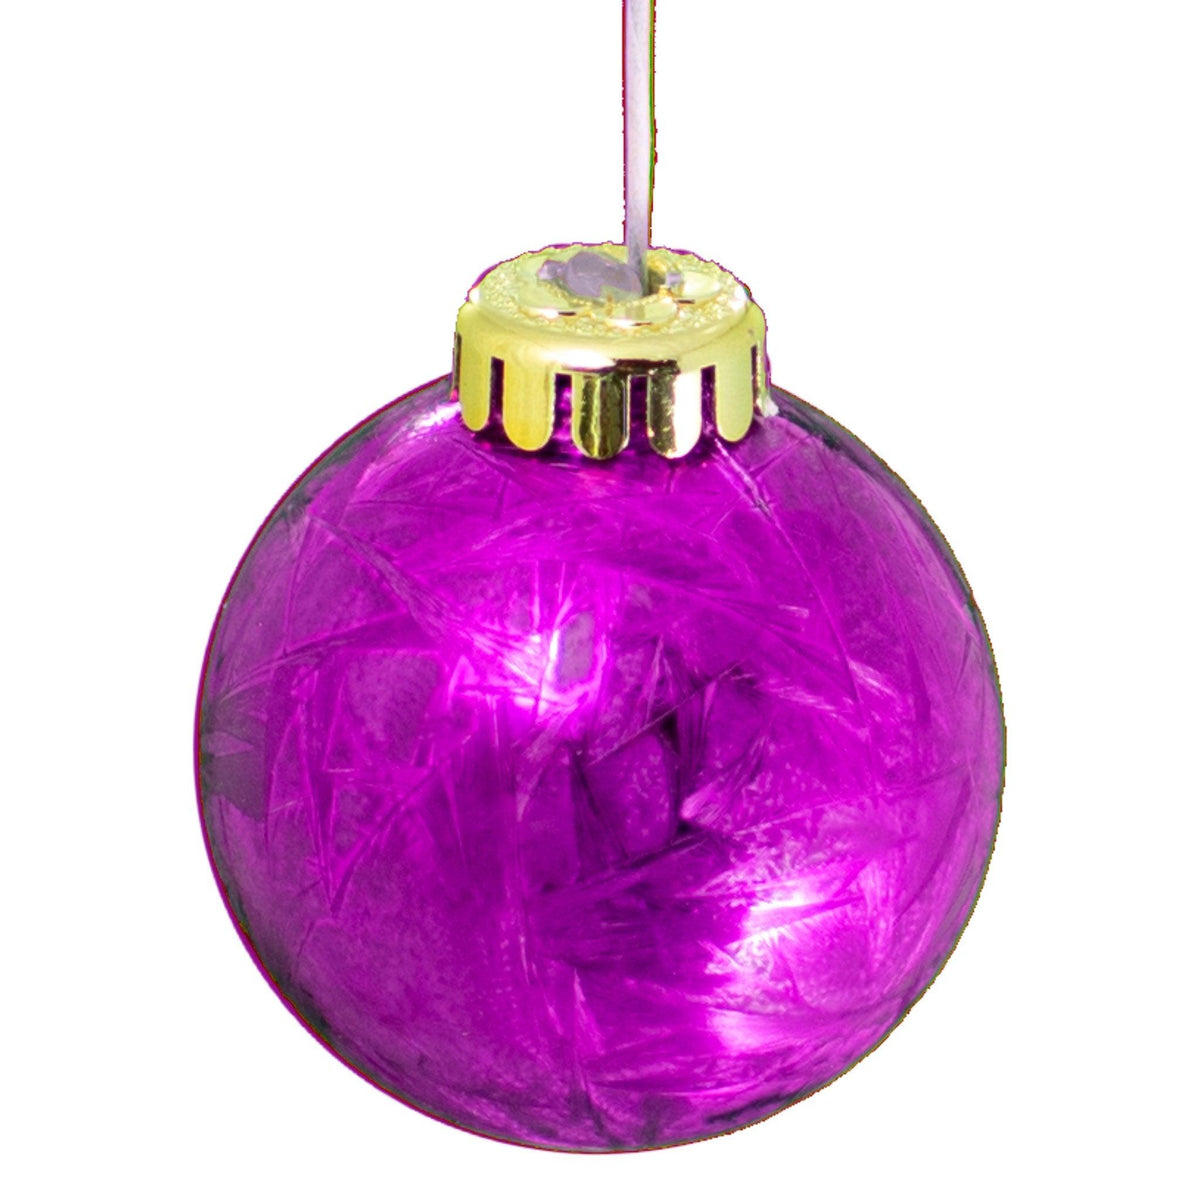 Lee Display offers brand new Shiny Fuscia Sequin Pink Plastic Ball Ornaments at wholesale prices for affordable Christmas Tree Hanging and Holiday Decorating on sale at leedisplay.com